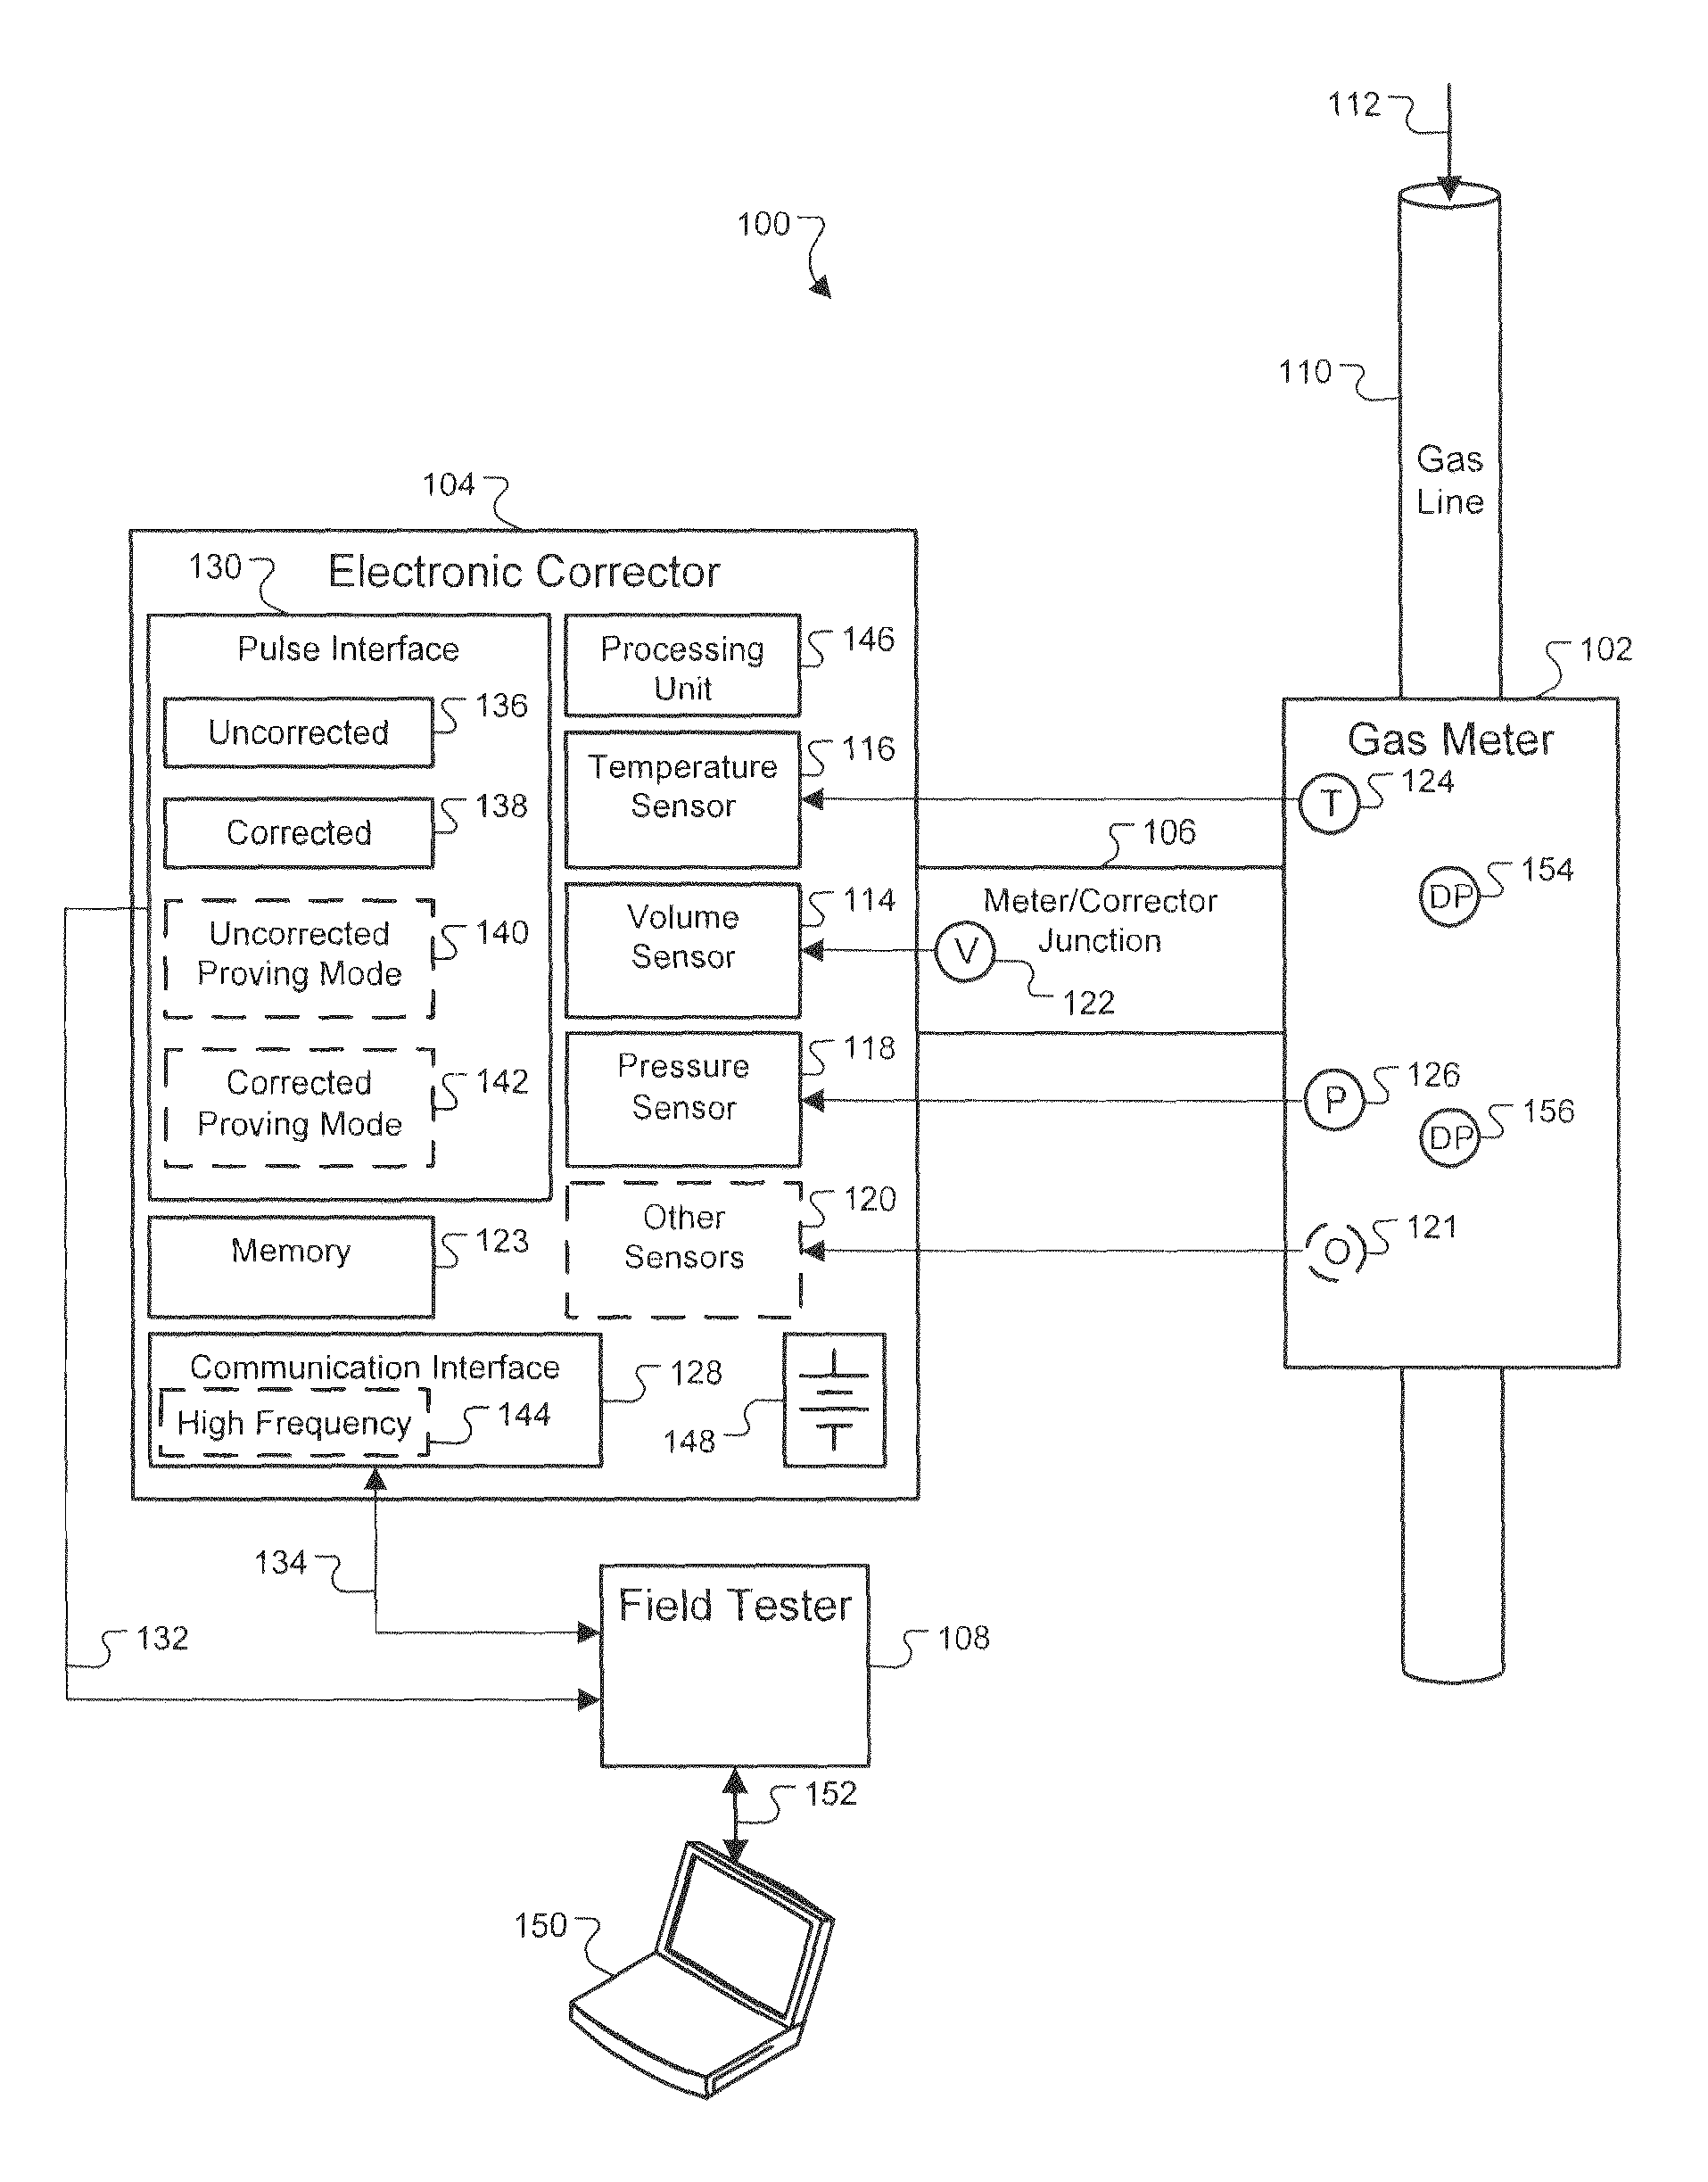 Portable Diagnostic Analysis of Gas Meter and Electronic Corrector